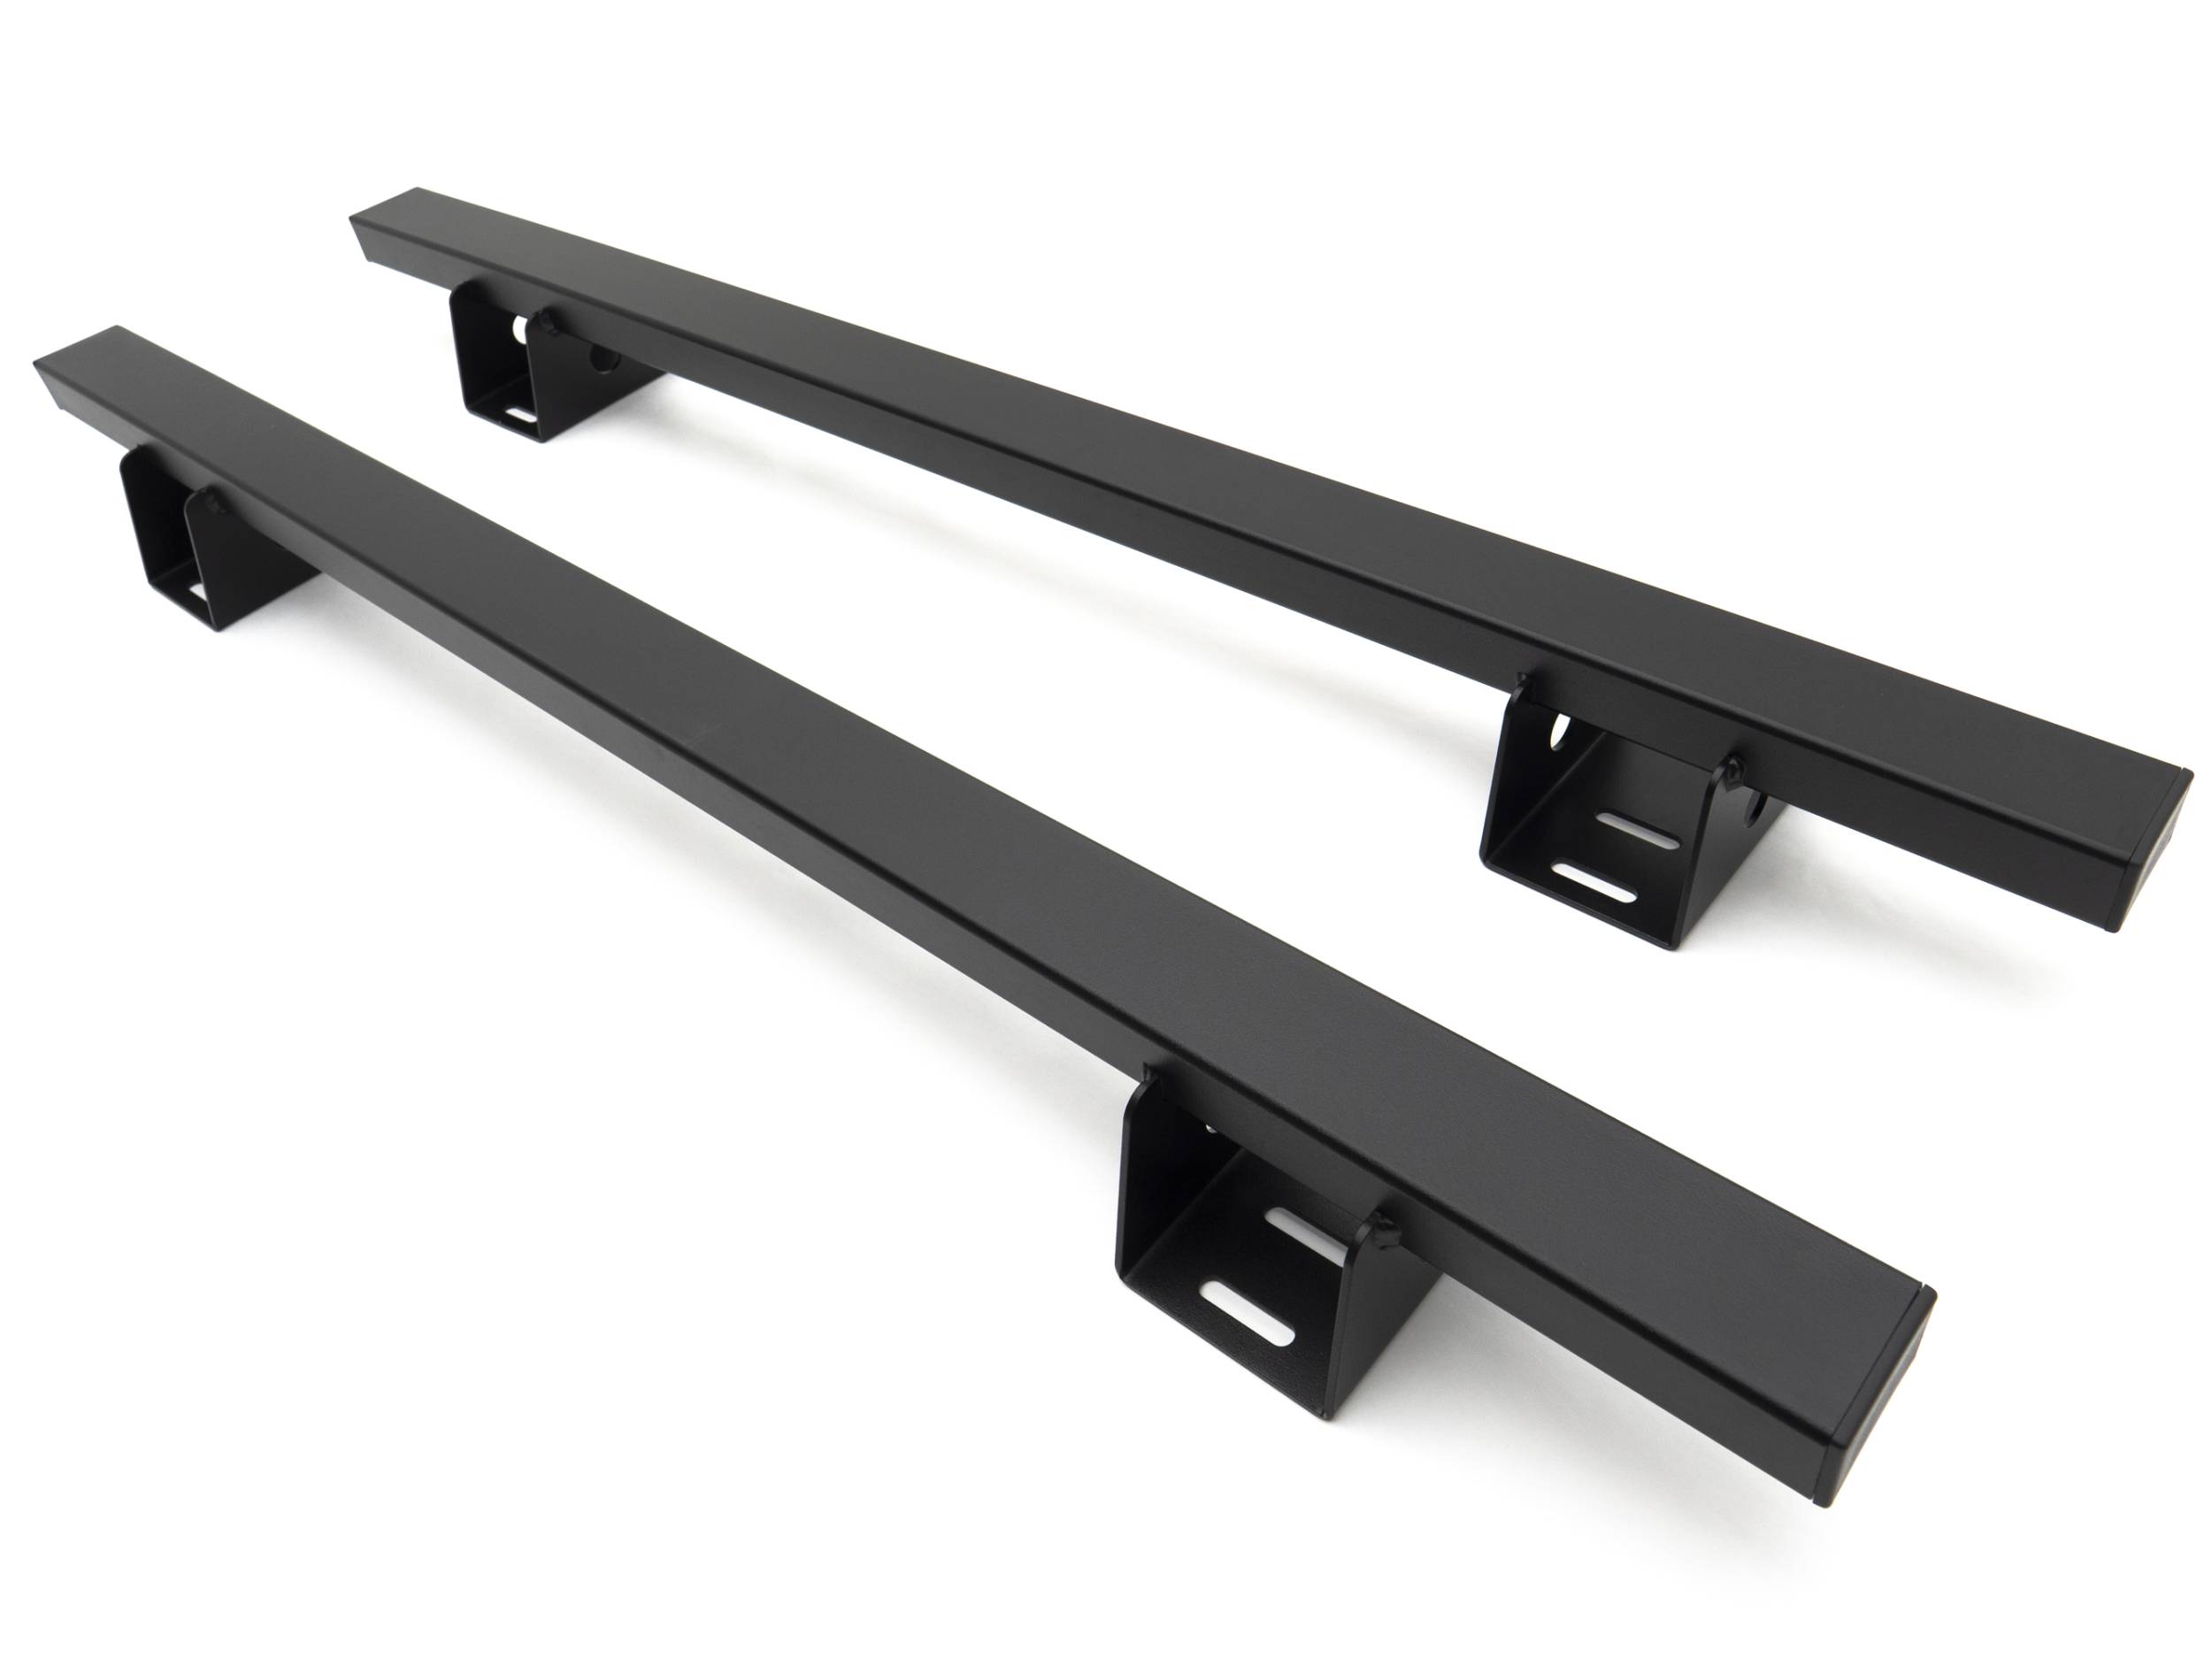 ZROADZ OFF ROAD PRODUCTS - 2019-2021 Ford Ranger Access Overland Rack Crossbars, Black, Mild Steel, Bolt-On, 2 Pc Set with Hardware - PN #Z835011